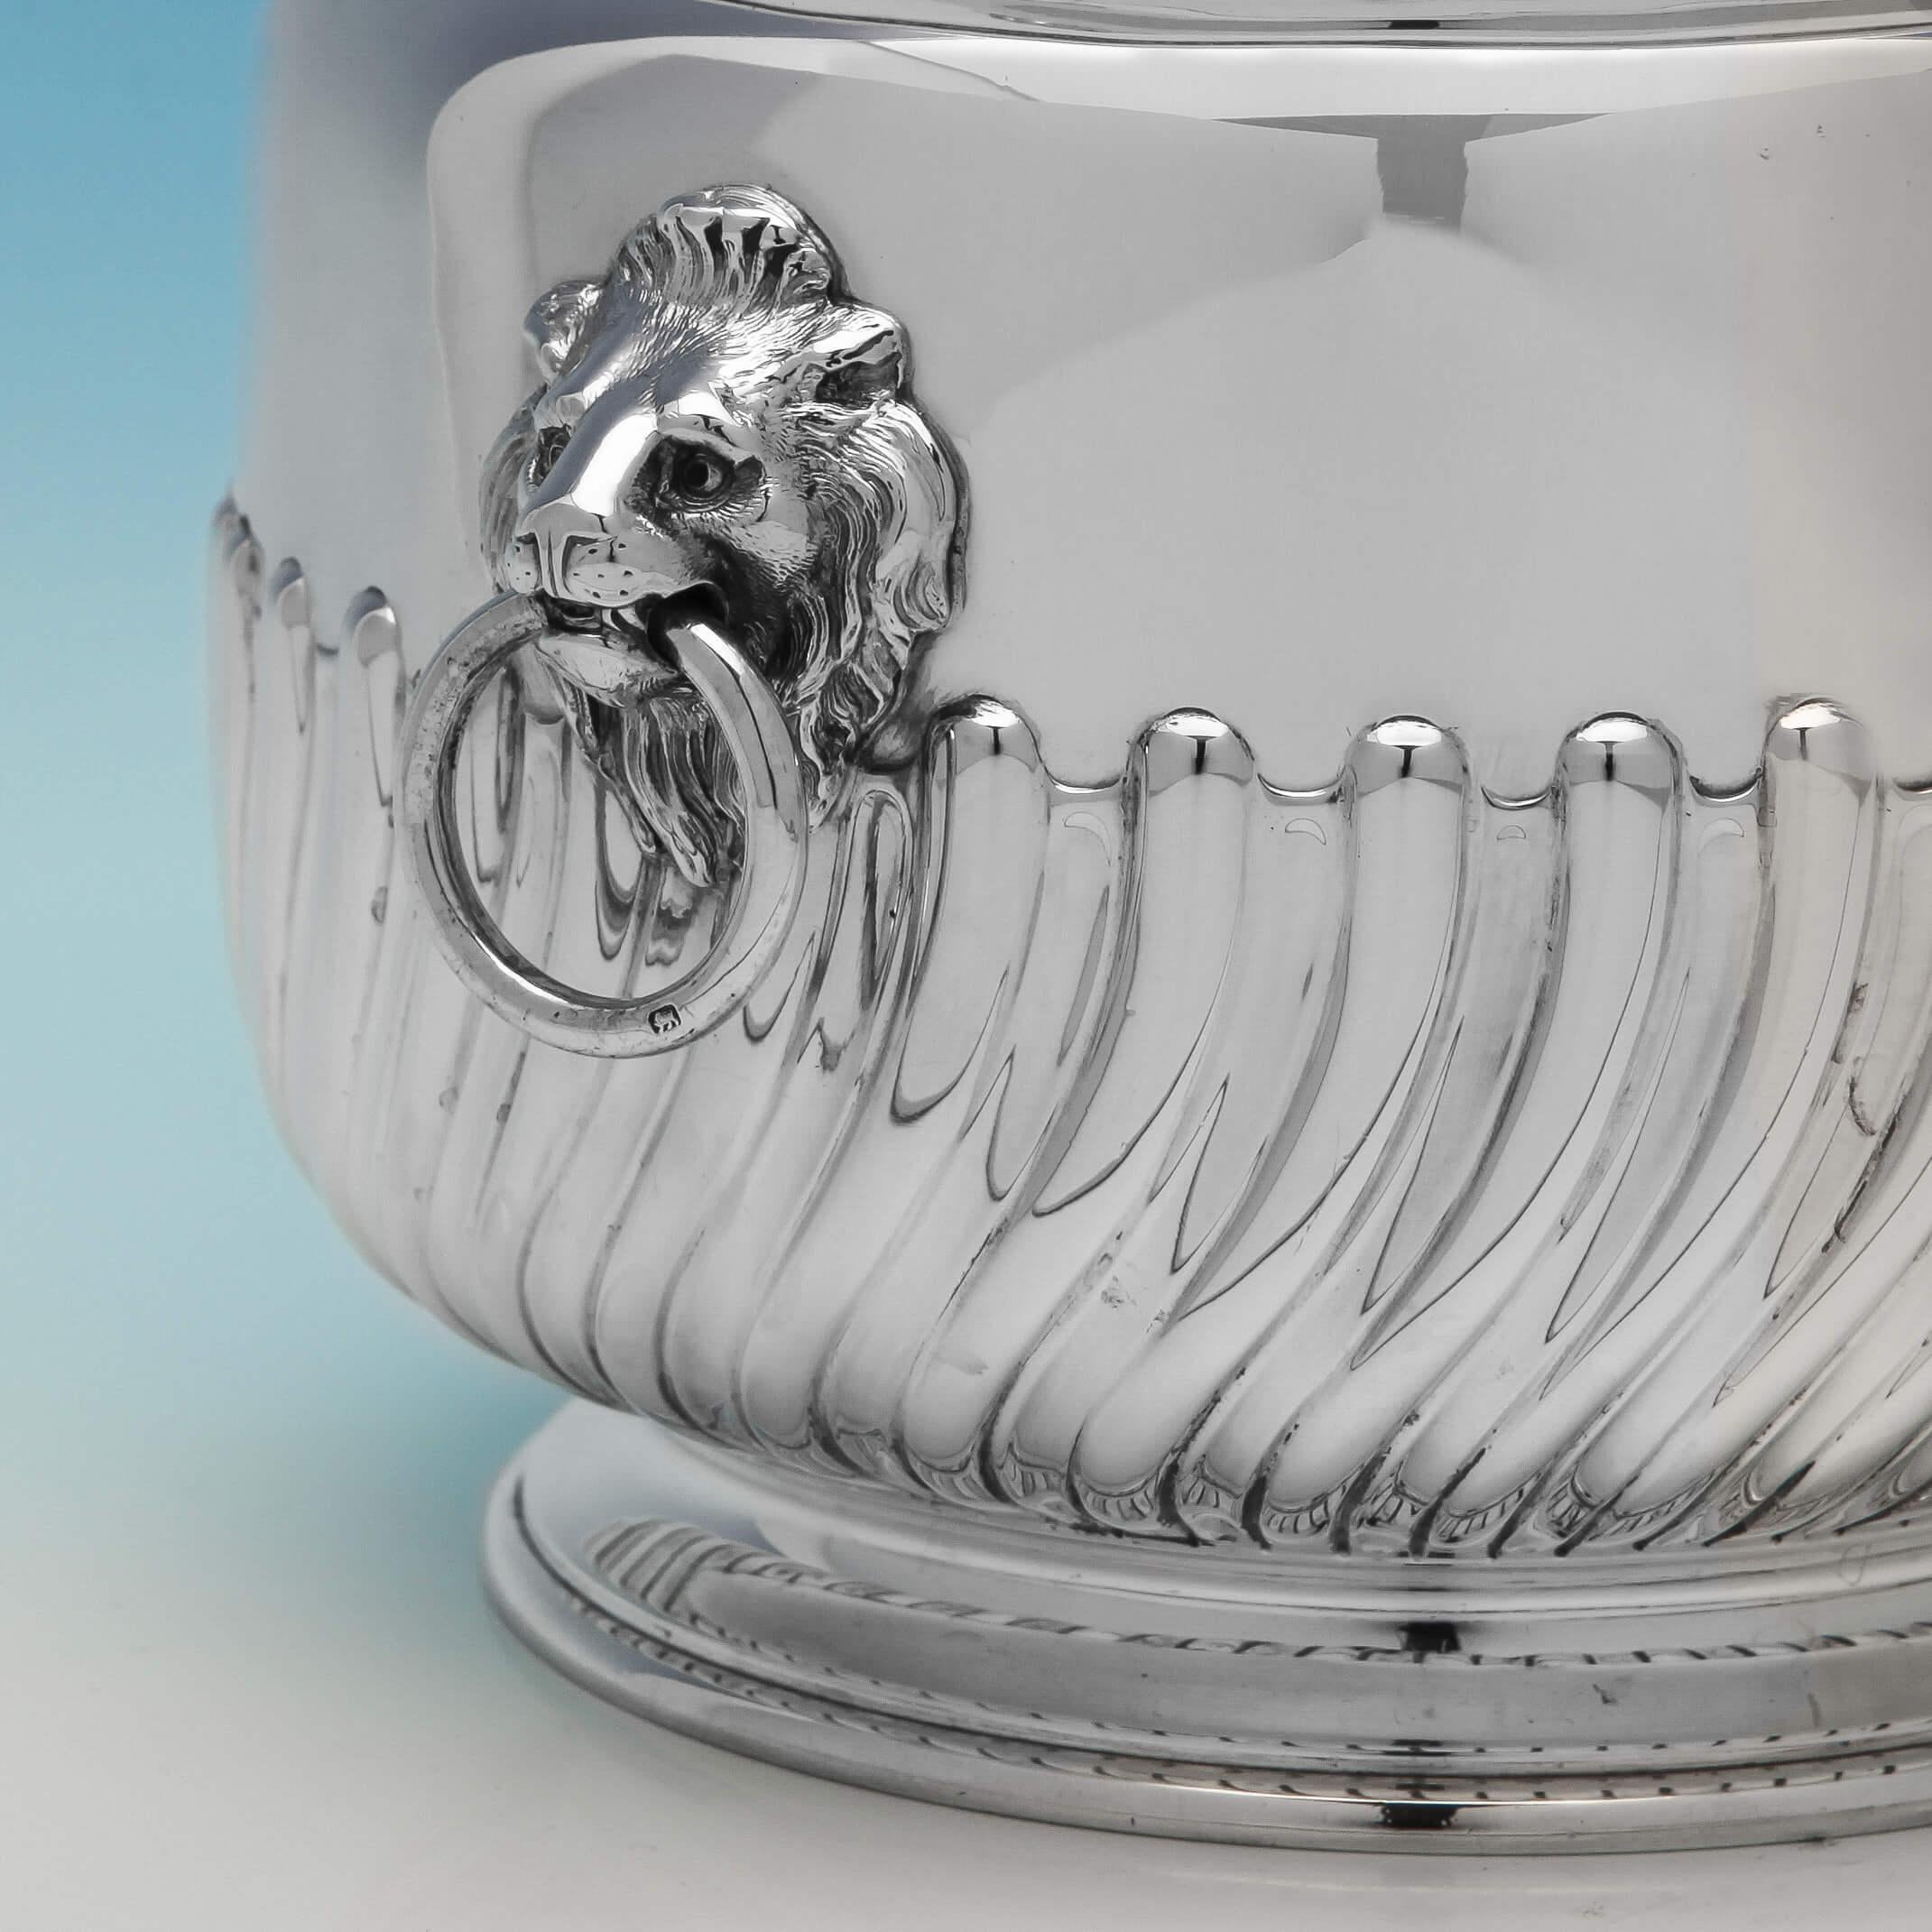 Hallmarked in London in 1889 by Barnards, this attractive Victorian, antique, sterling silver biscuit box, has swirled and sunken half fluting, in the Queen Anne style. It has a flush hinged lid and applied lion mask drop ring handles. This biscuit